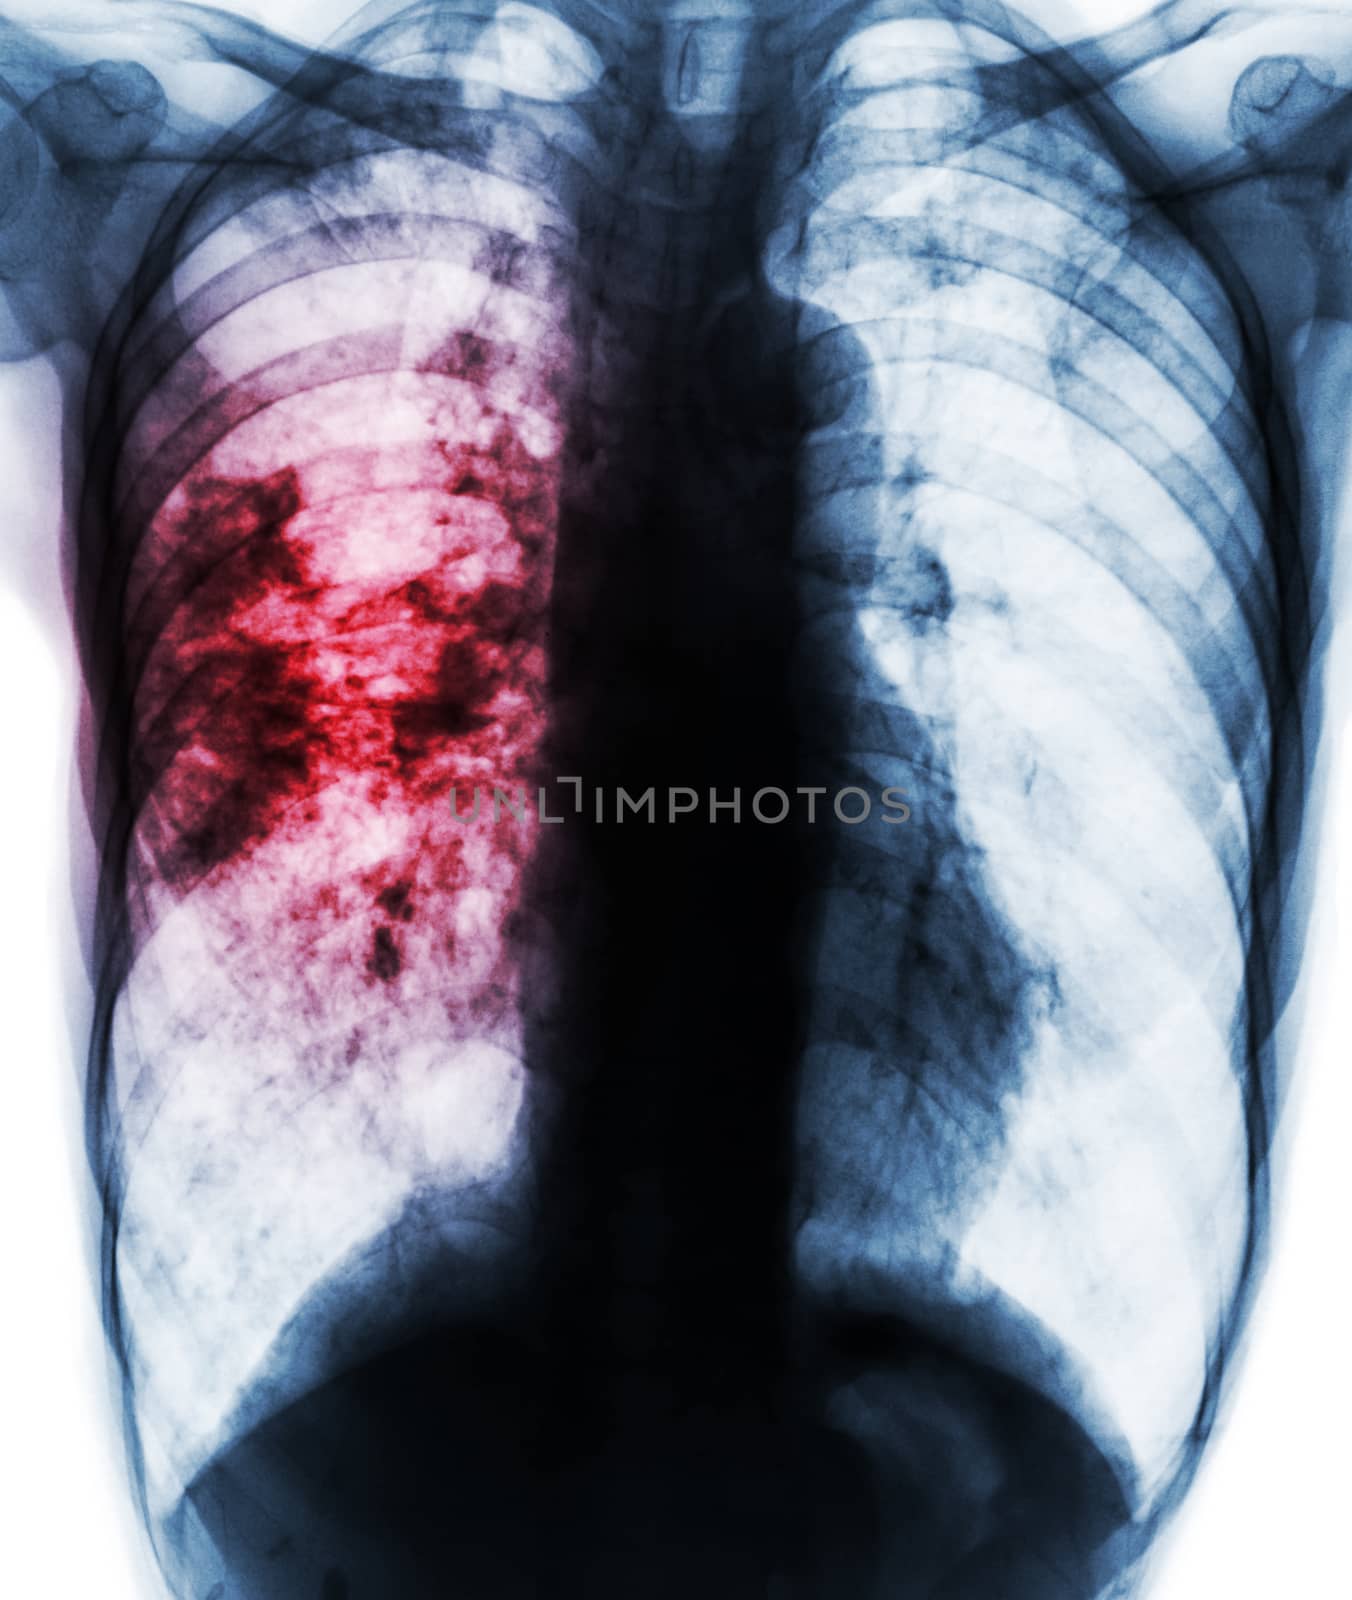 Pulmonary tuberculosis . Film x-ray of chest show patchy infiltrate at right lung due to TB infection .